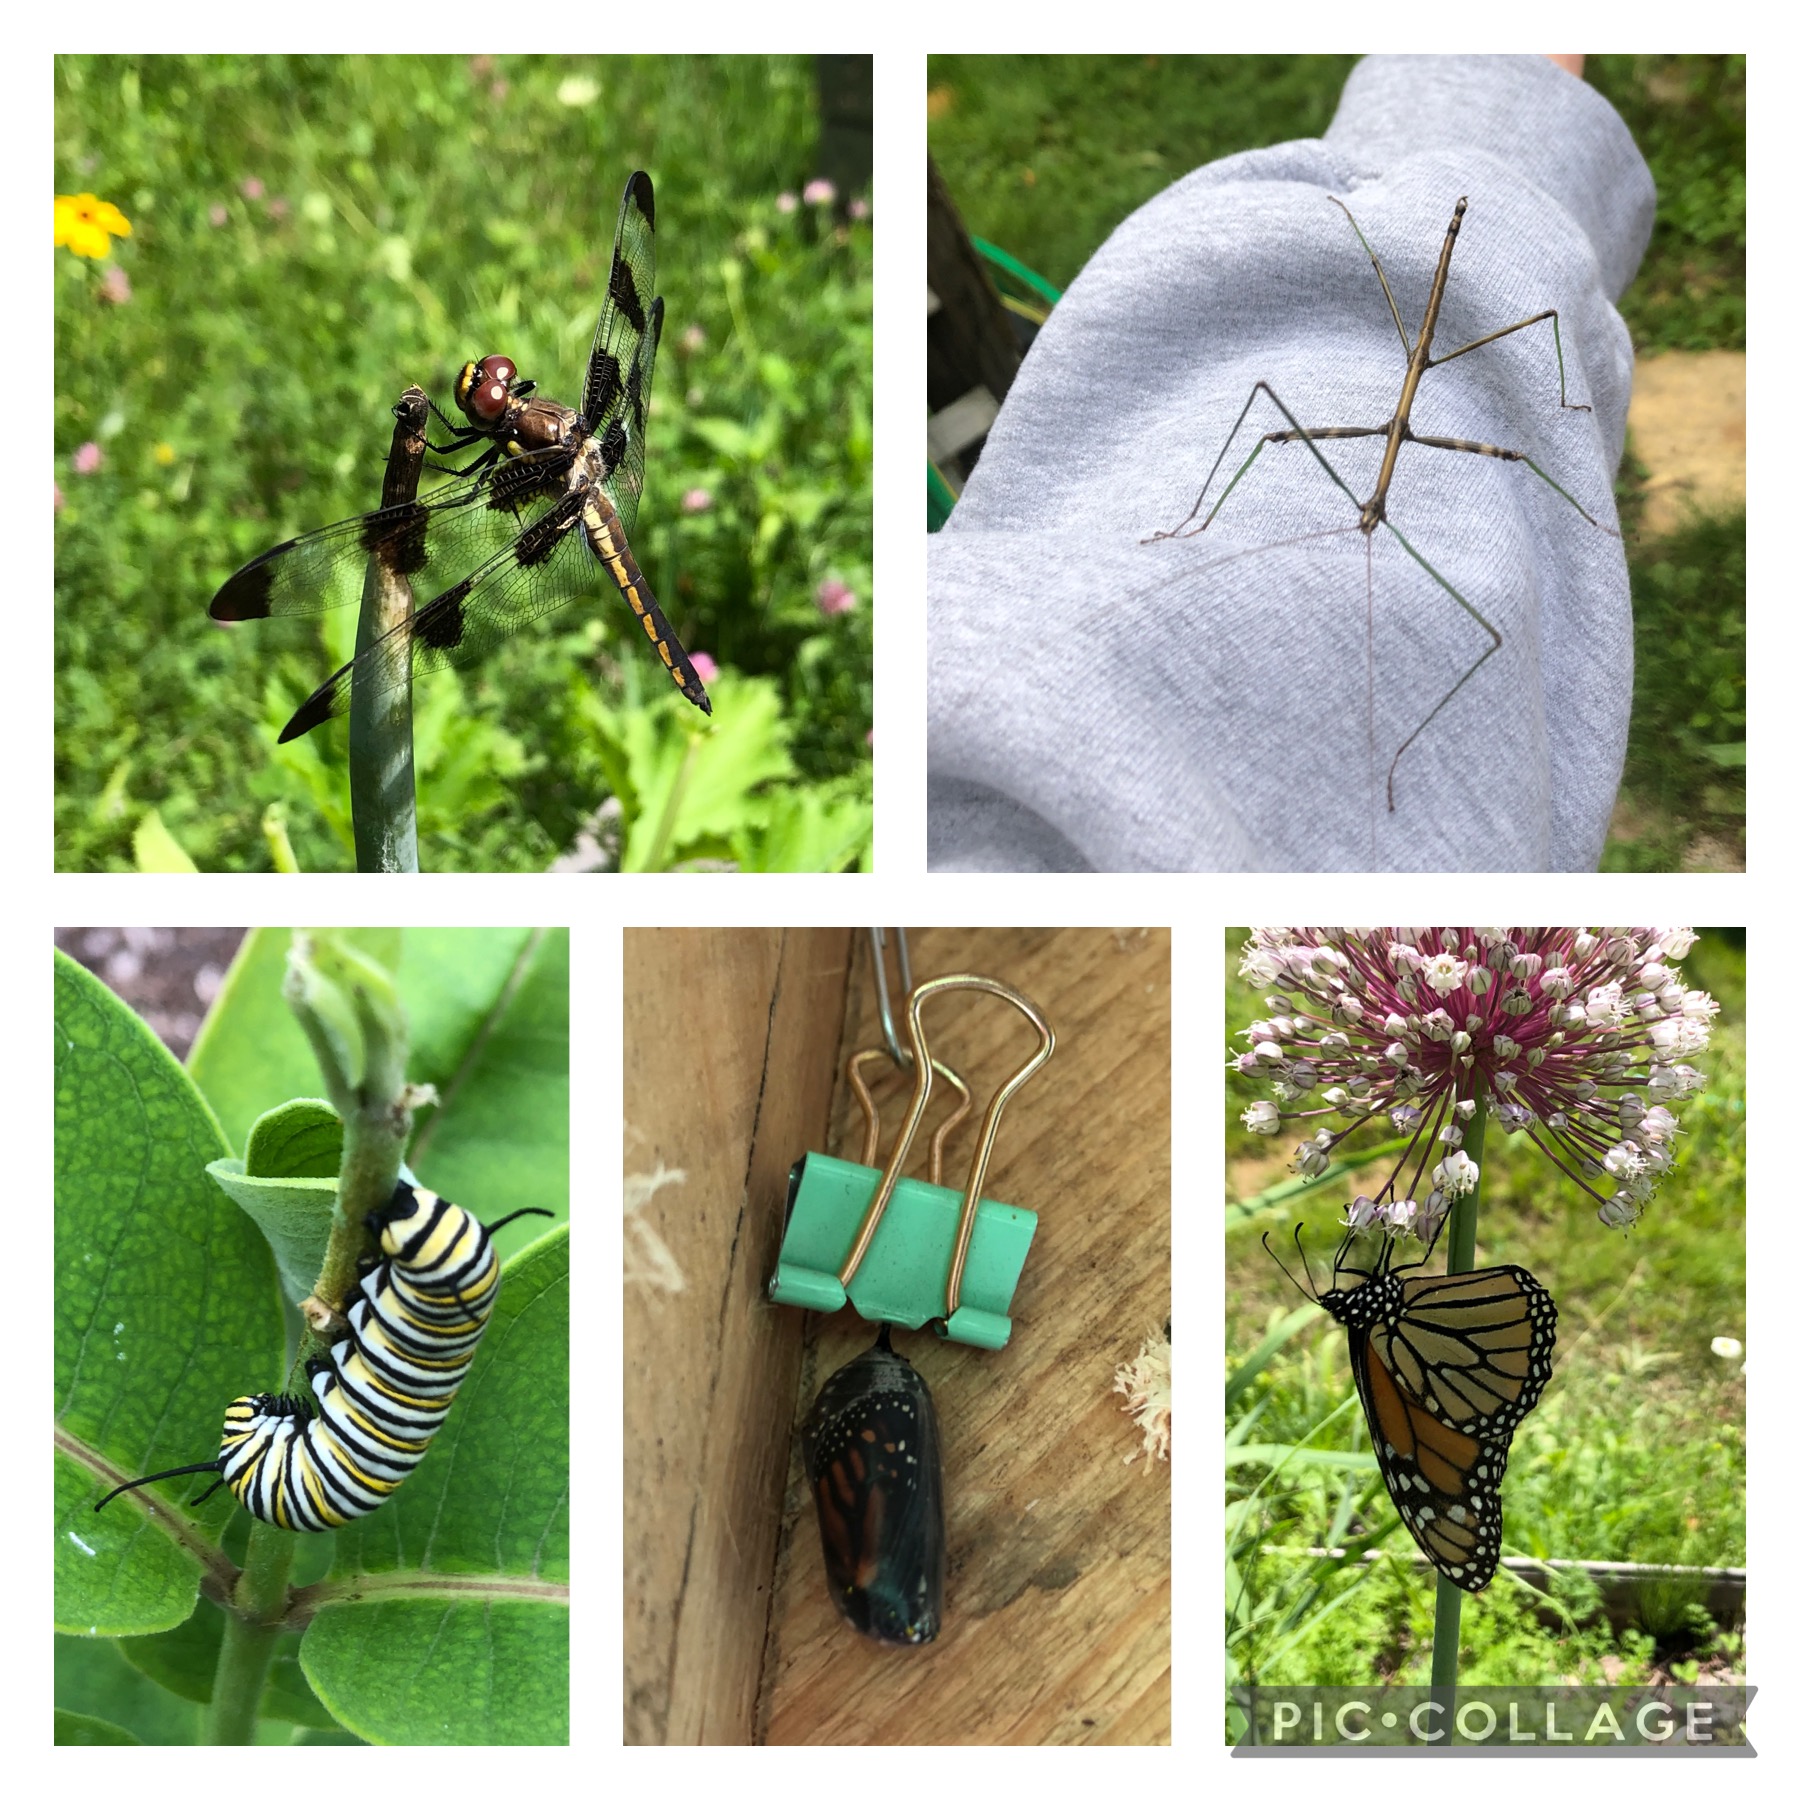 An image a pic collage of a variety of bugs from dragon flies and stick bugs to monarch catepillars and butterflies. 